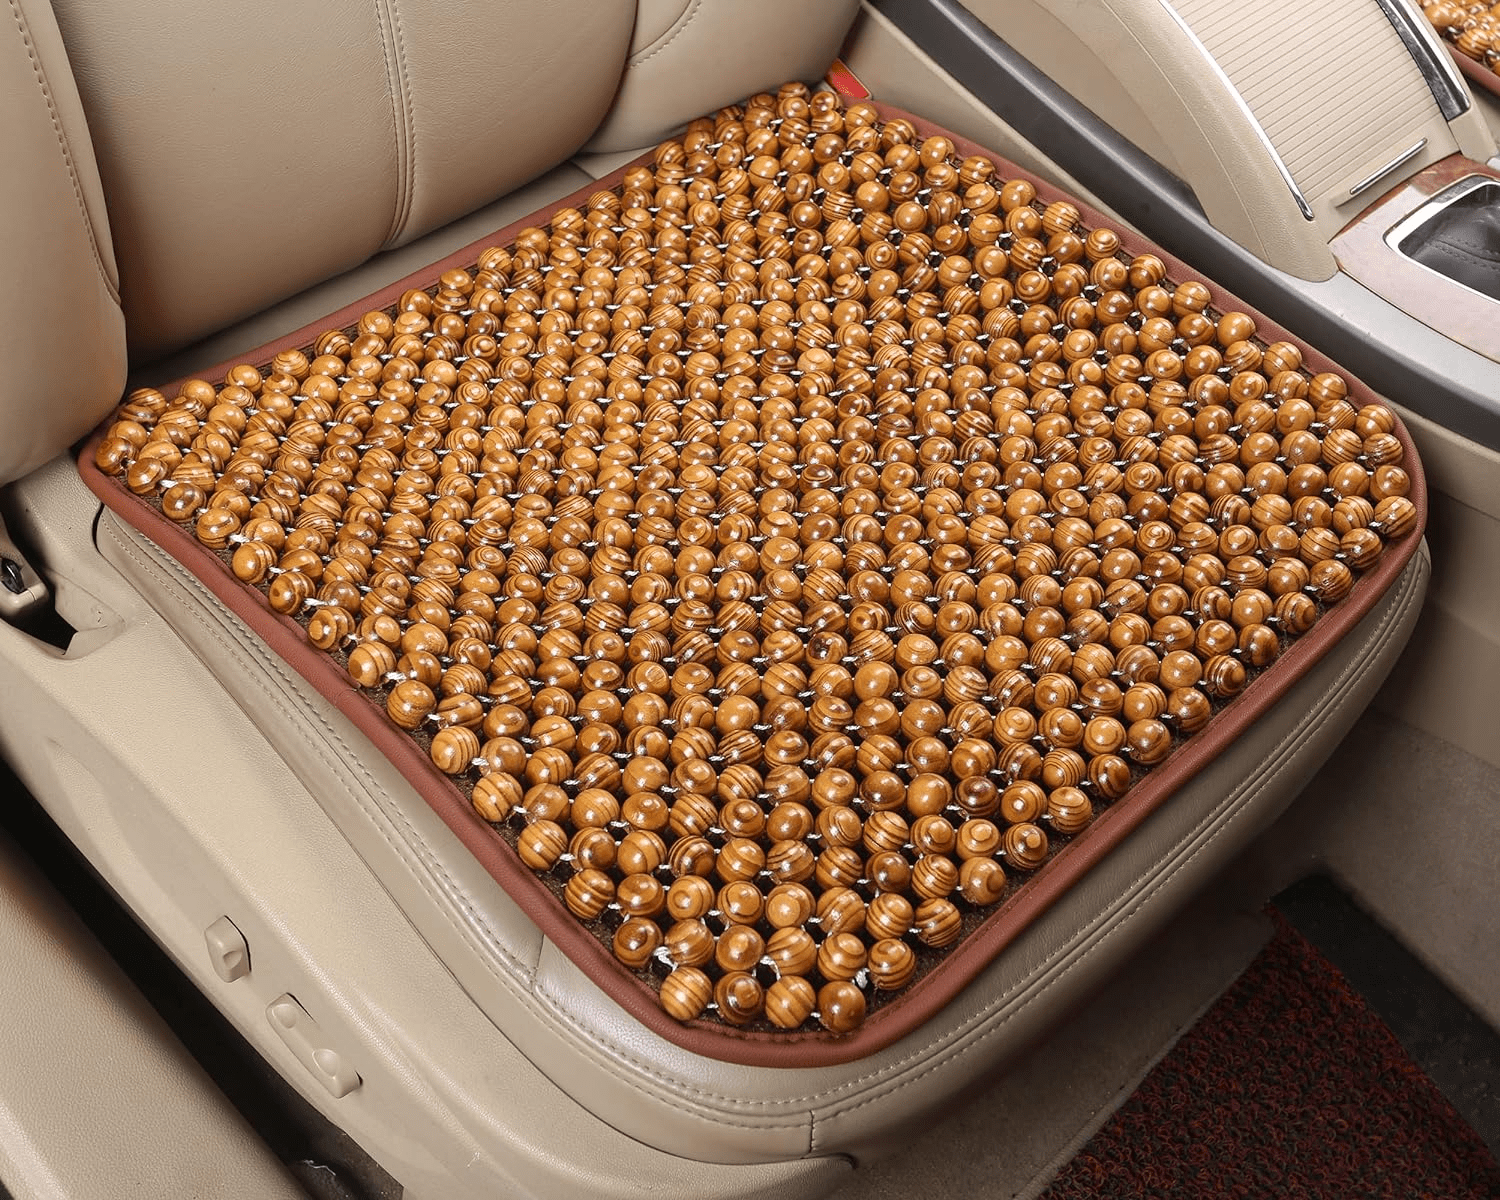 AutoCraft Car & SUV & Truck Seat Cushion, Sand Wood Bead, Universal, Cooling, Easy Fit, Massage, 1 Pack AC2094